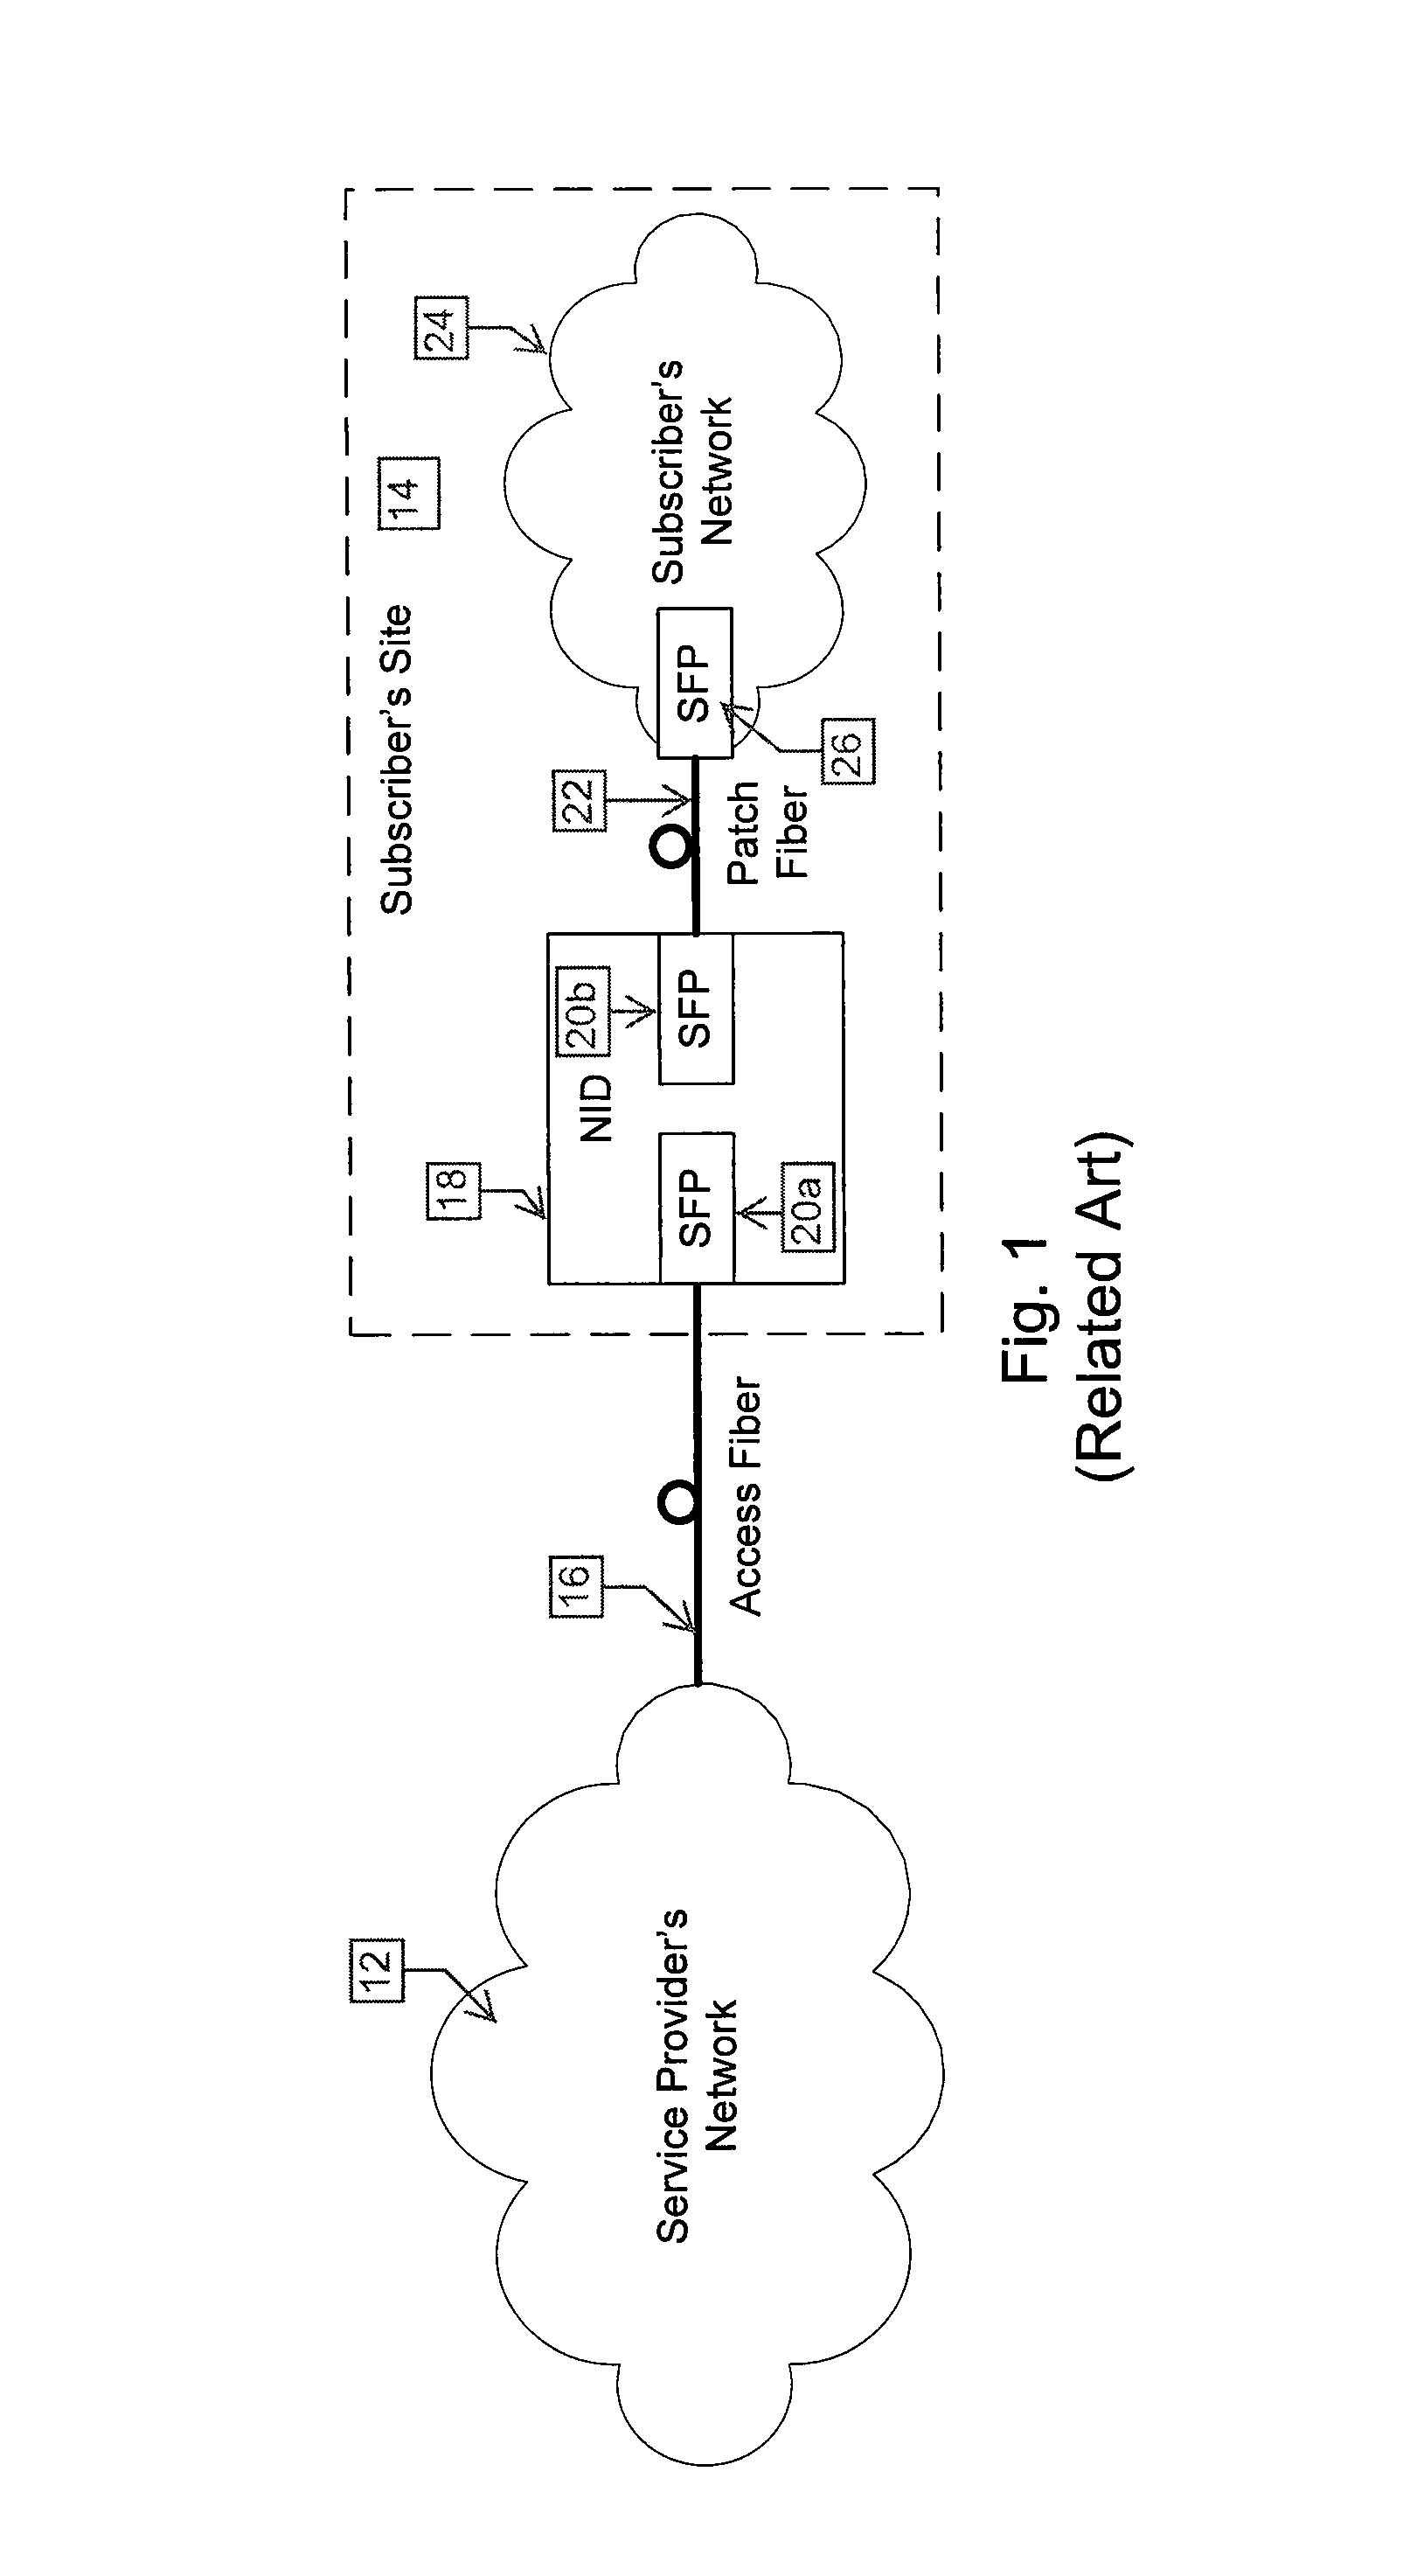 Methods and apparatuses for implementing a layer 3 internet protocol (IP) echo response function on a small form-factor pluggable (SFP) transceiver and providing a universal interface between an SFP transceiver and network equipment